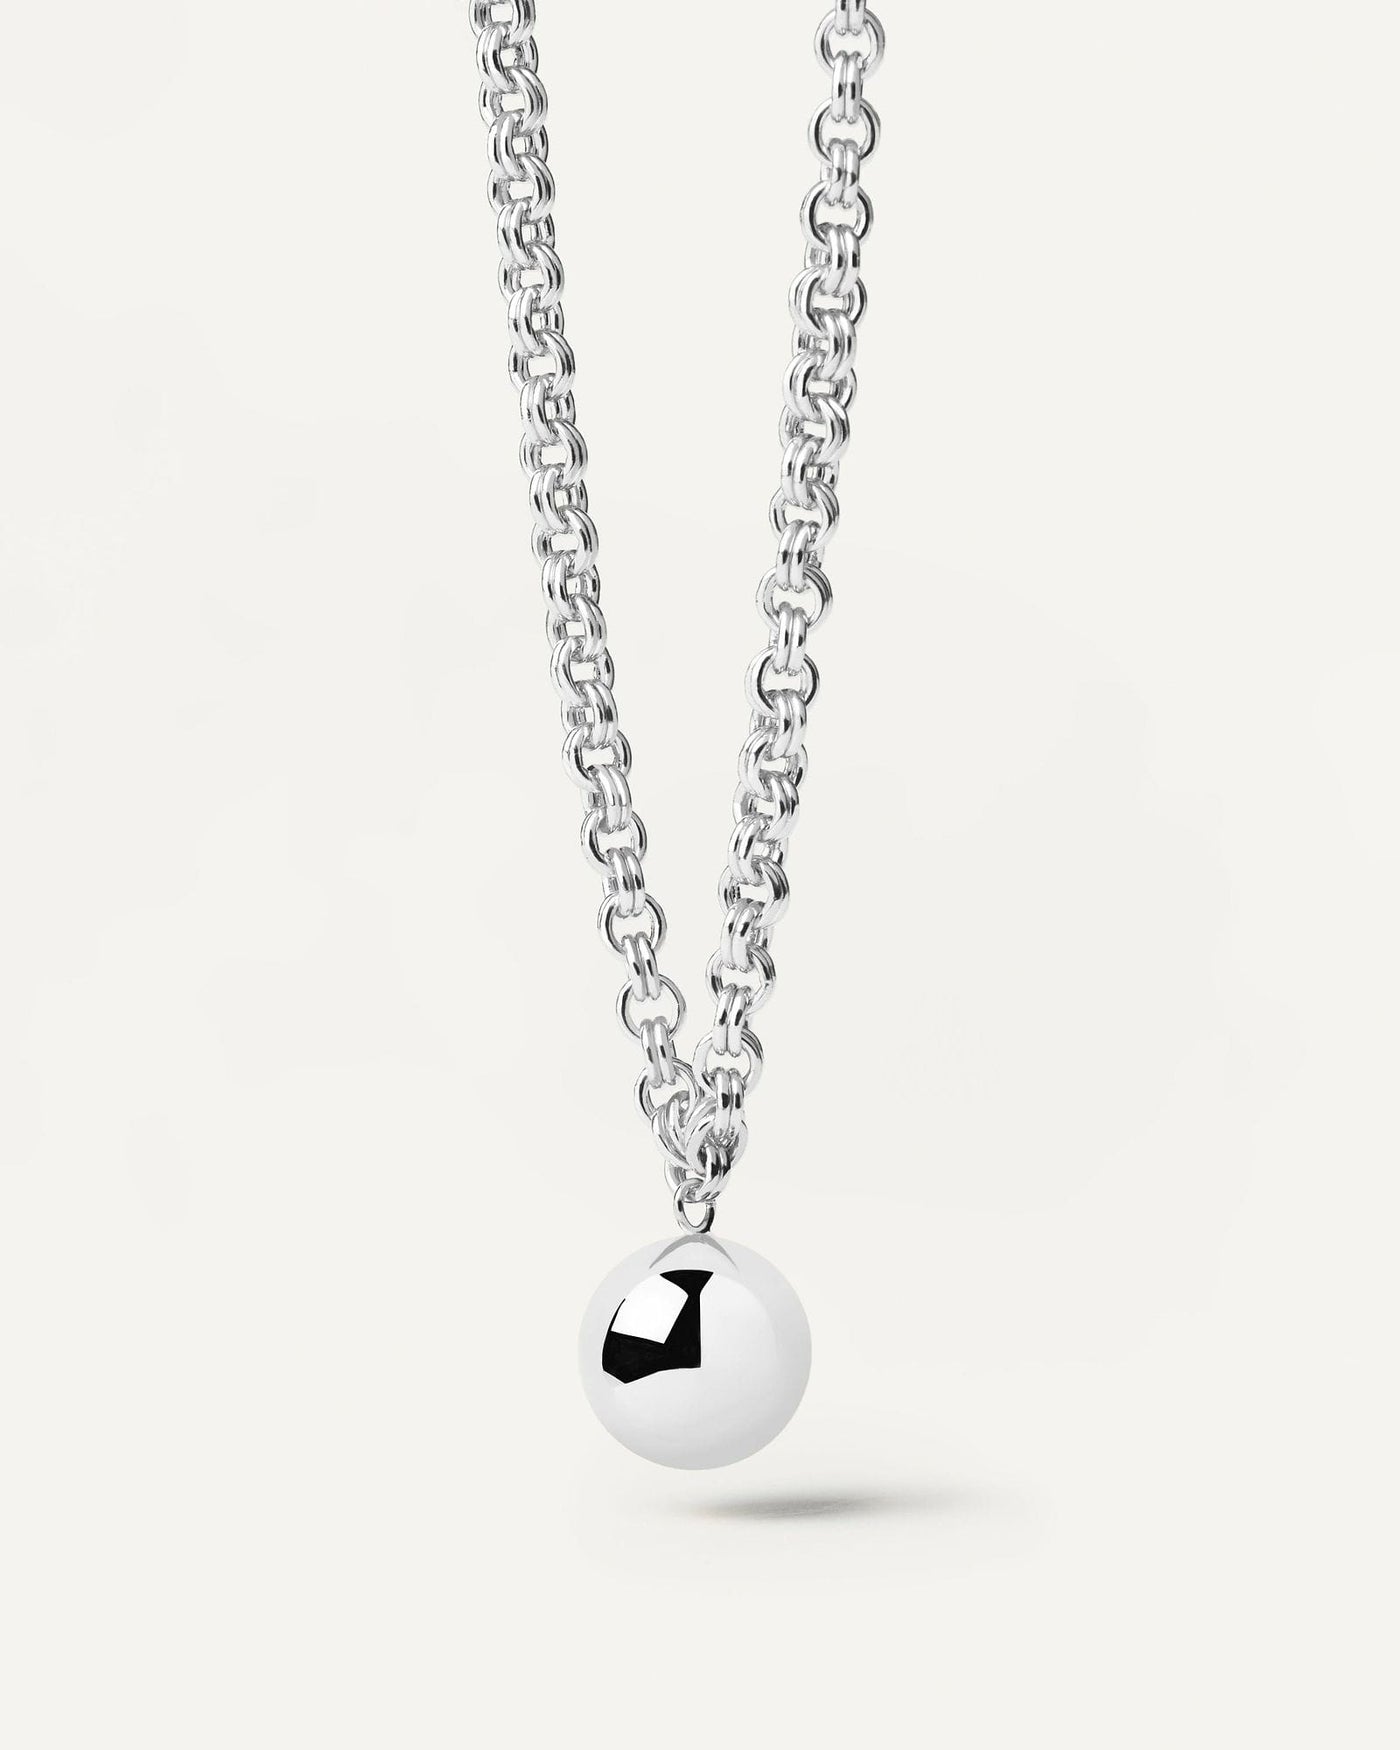 2024 Selection | Super Future Silver Necklace. Sterling Silver chain necklace with a hanging ball pendant. Get the latest arrival from PDPAOLA. Place your order safely and get this Best Seller. Free Shipping.